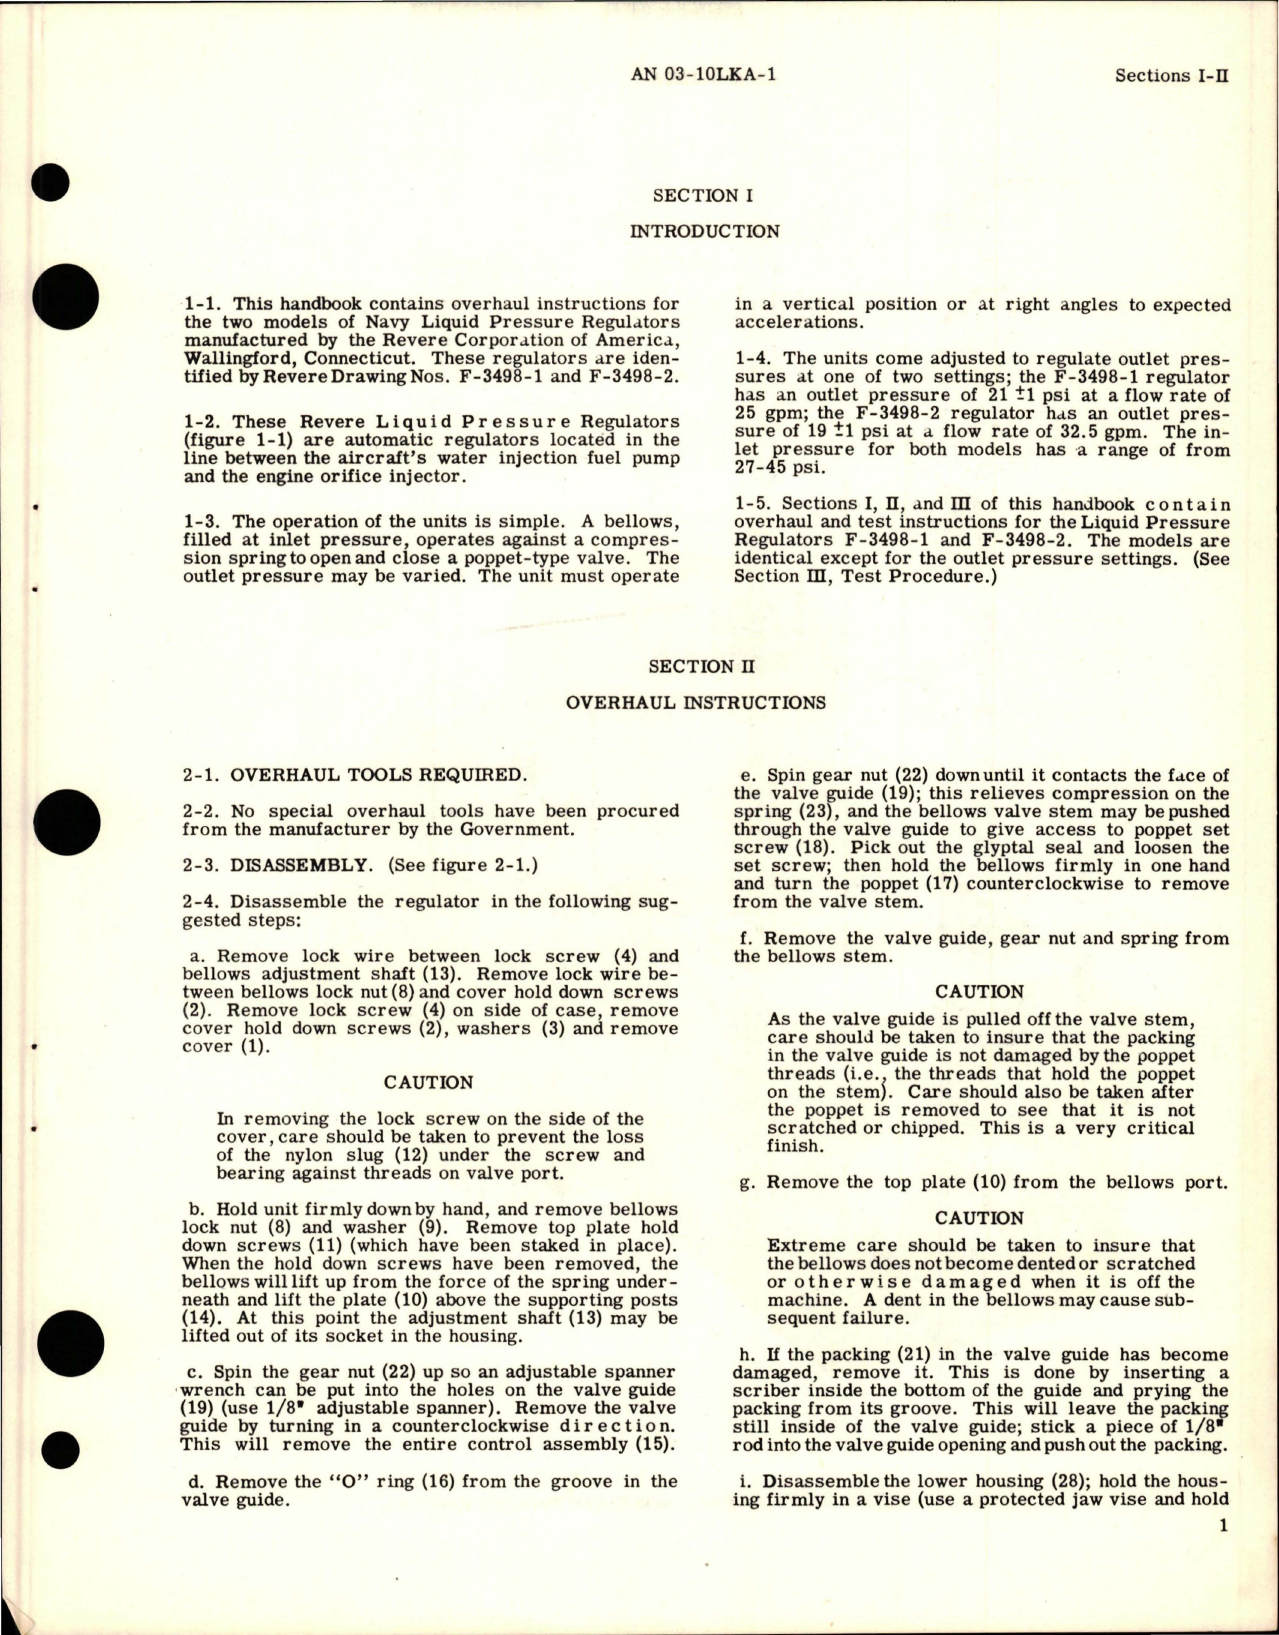 Sample page 5 from AirCorps Library document: Overhaul Instructions for Liquid Pressure Regulators - Models F-3498-1 and F-3498-2